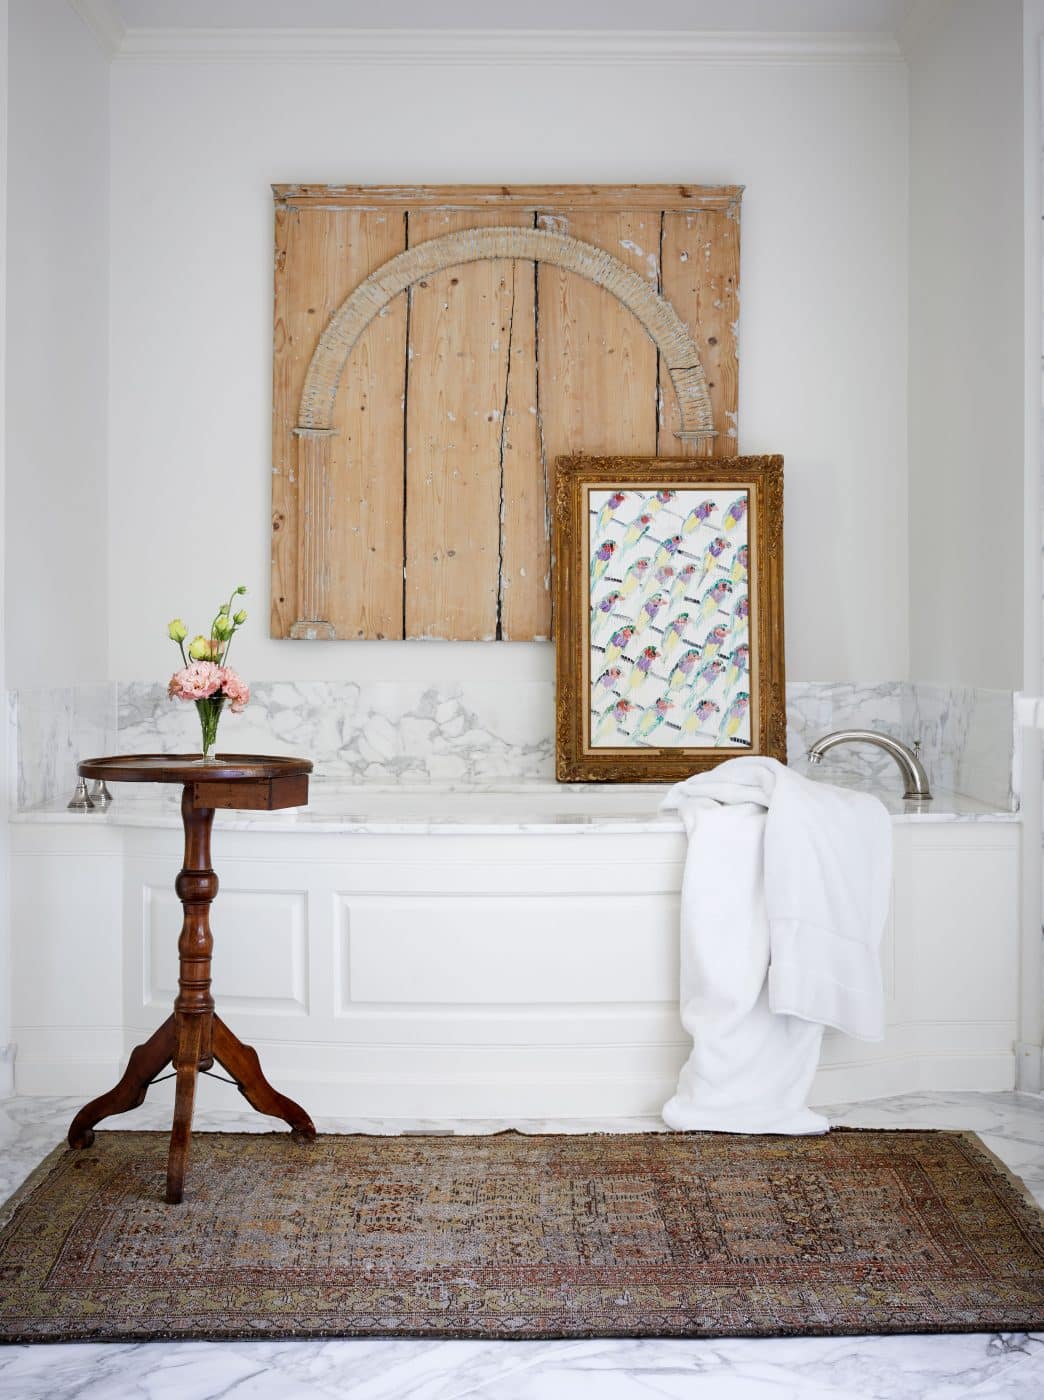 Around the bathtub are antiques in the form of a drinks table, rug and an architectural fragment on the wall. The aviary art is by Hunt Slonem.